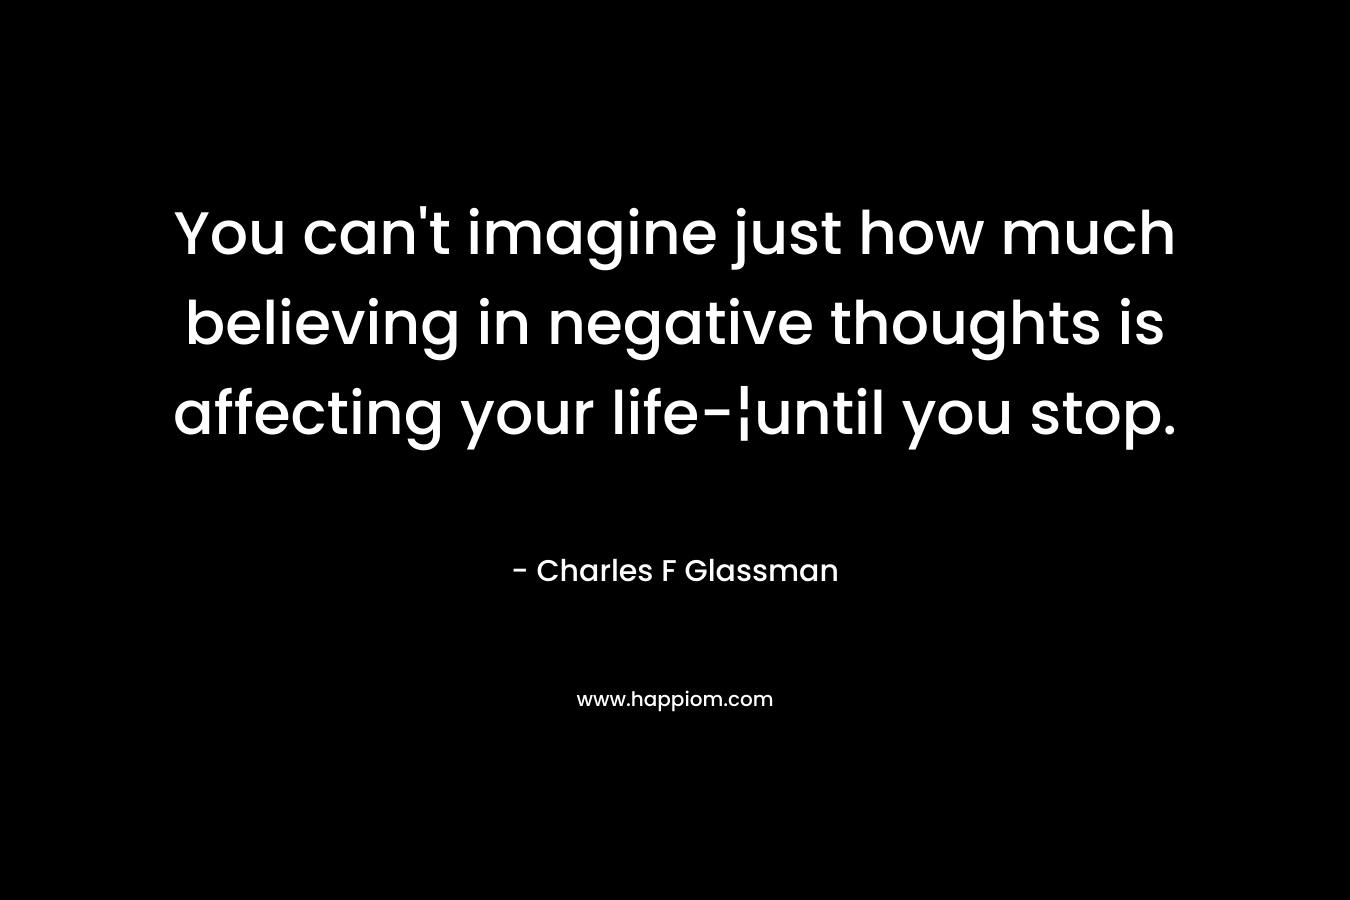 You can’t imagine just how much believing in negative thoughts is affecting your life-¦until you stop. – Charles F Glassman